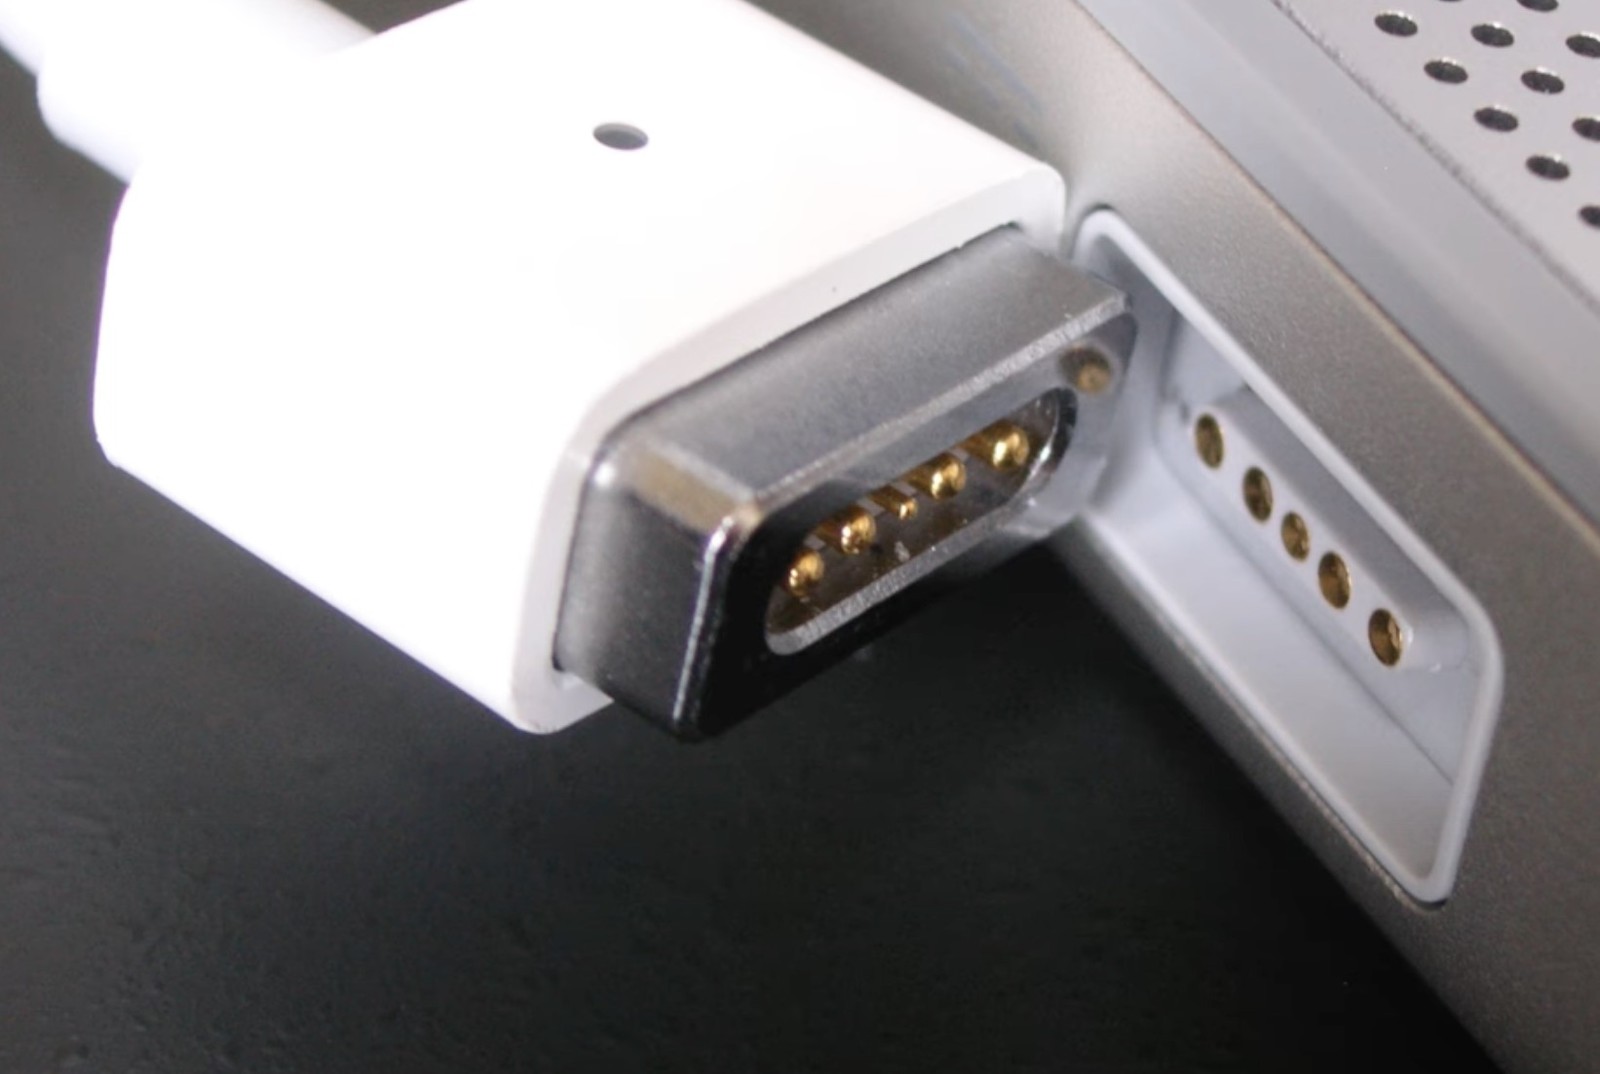 MagSafe is Coming Back to the Mac A Look Back at Apple's Original